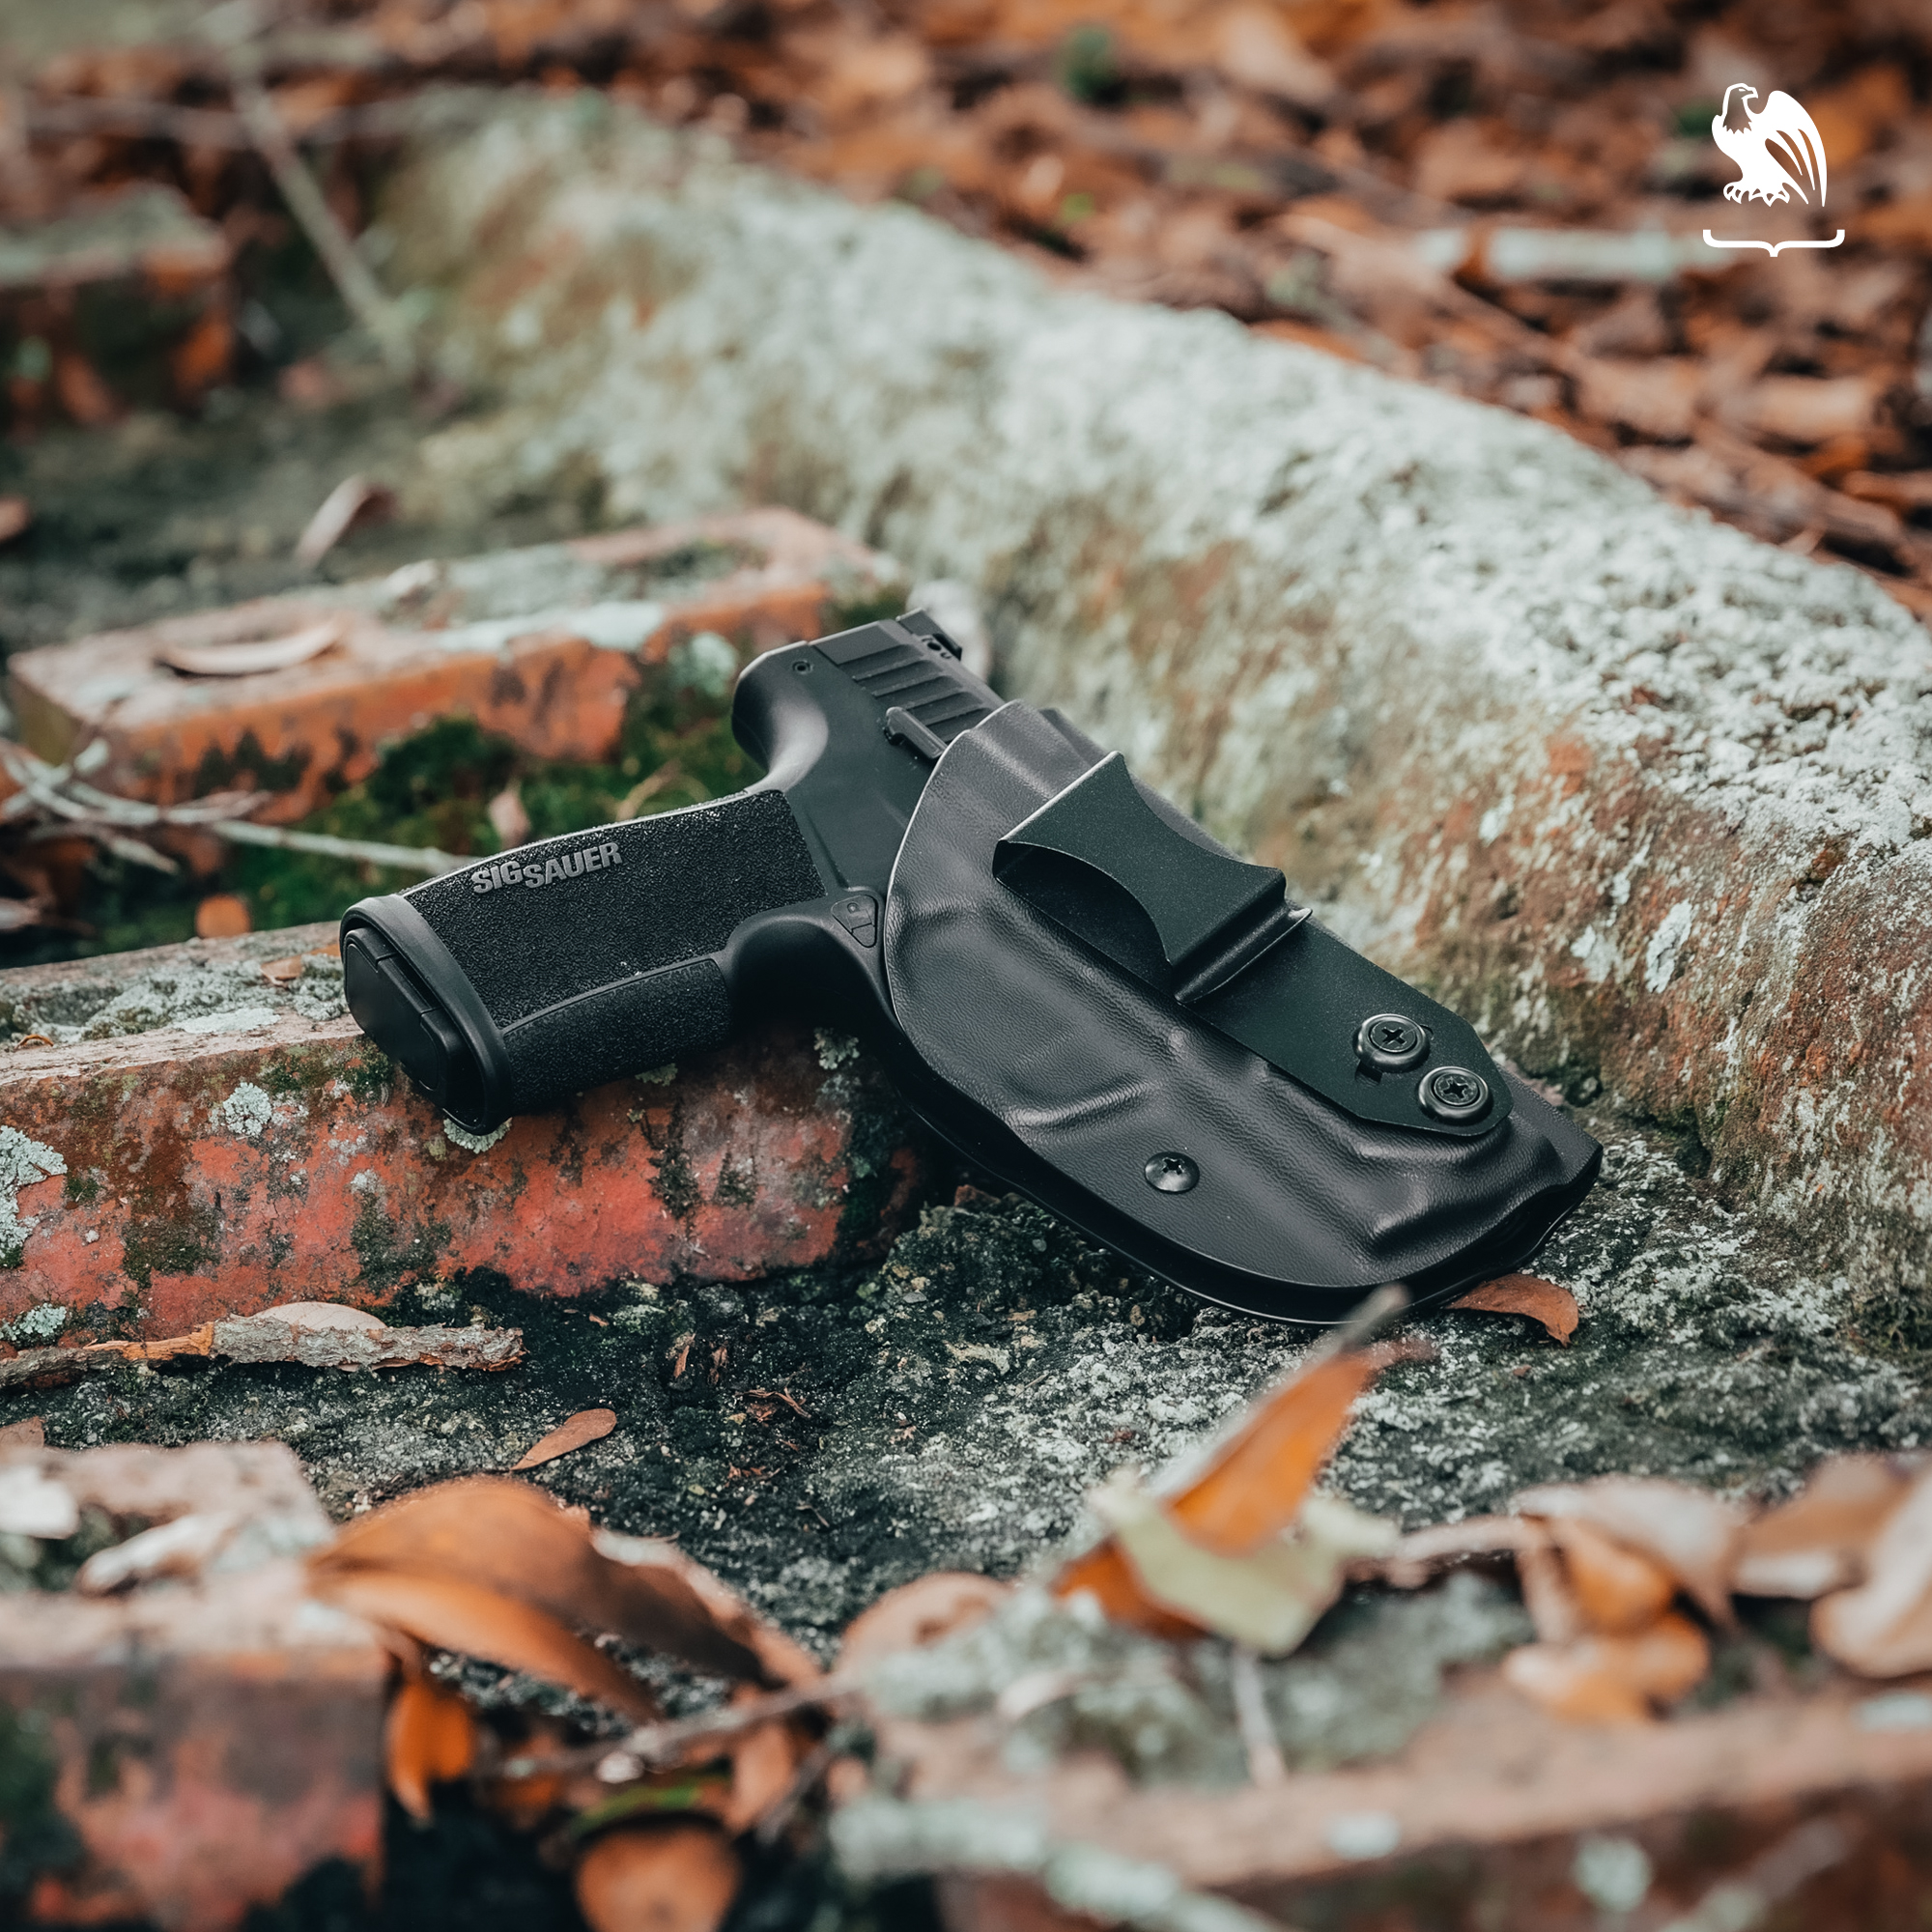 Sig Sauer P322 in a Vedder Holsters holster